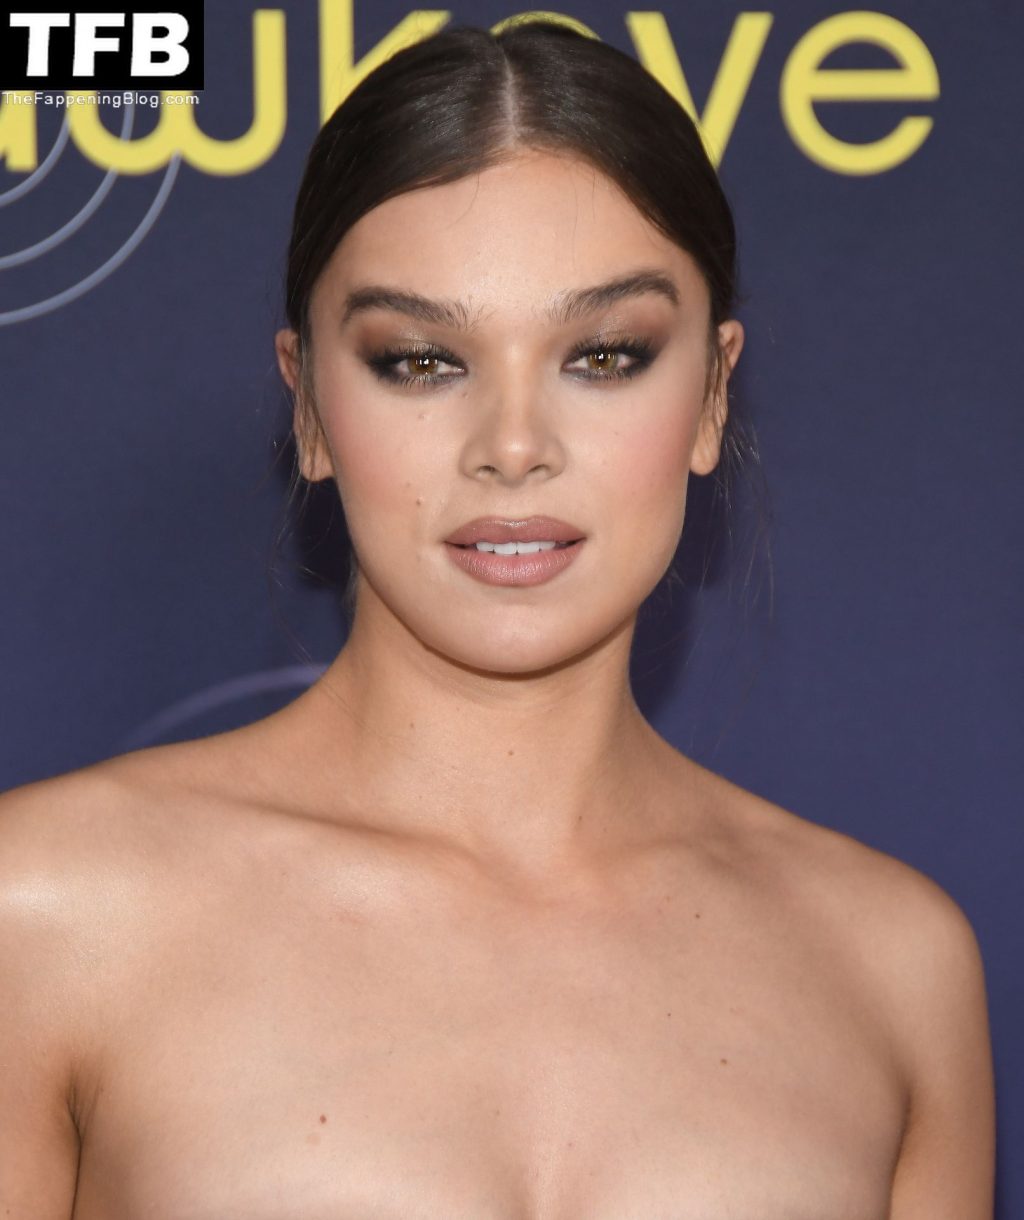 Hailee Steinfeld Looks Hot at the “Hawkeye” Los Angeles Premiere (67 Photos)